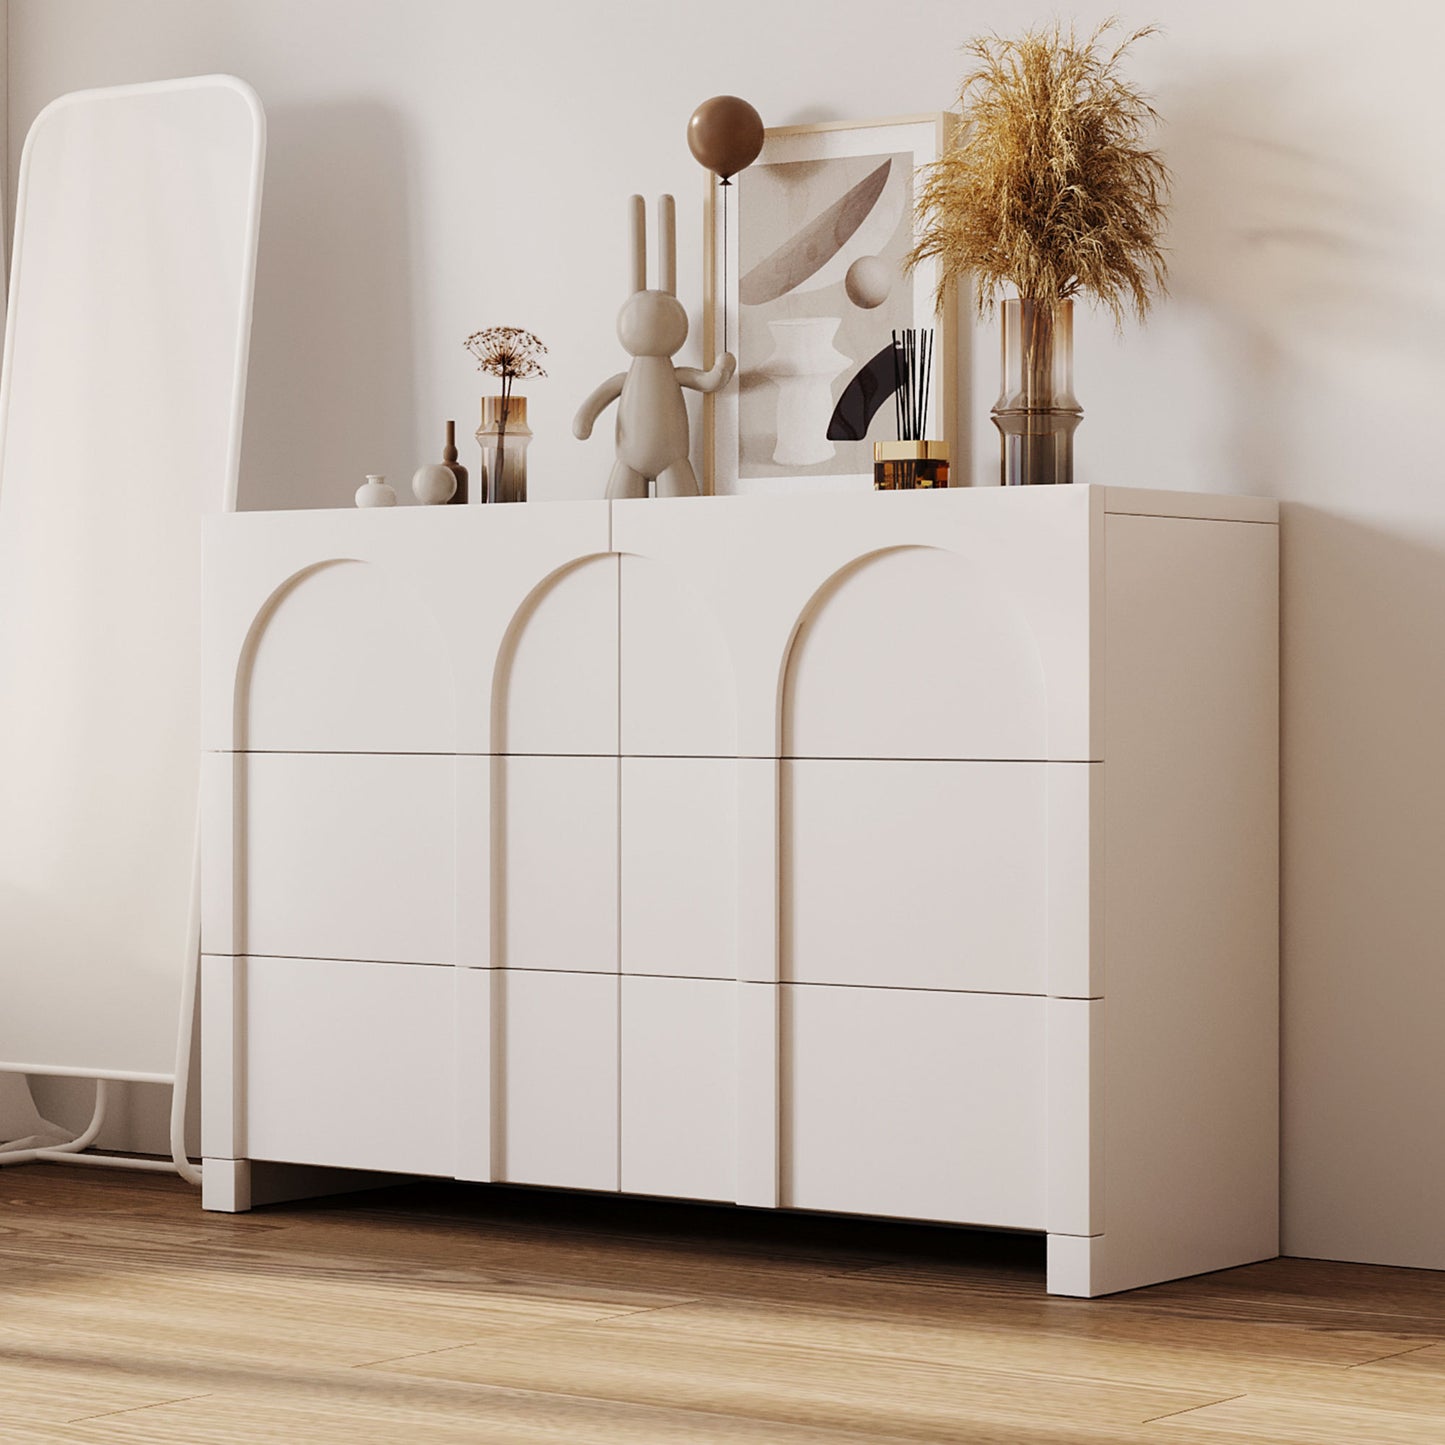 Modern Style Six-Drawer Dresser Sideboard Cabinet Ample Storage Spaces for Living Room, Children's Room, Adult Room, Half Gloss White